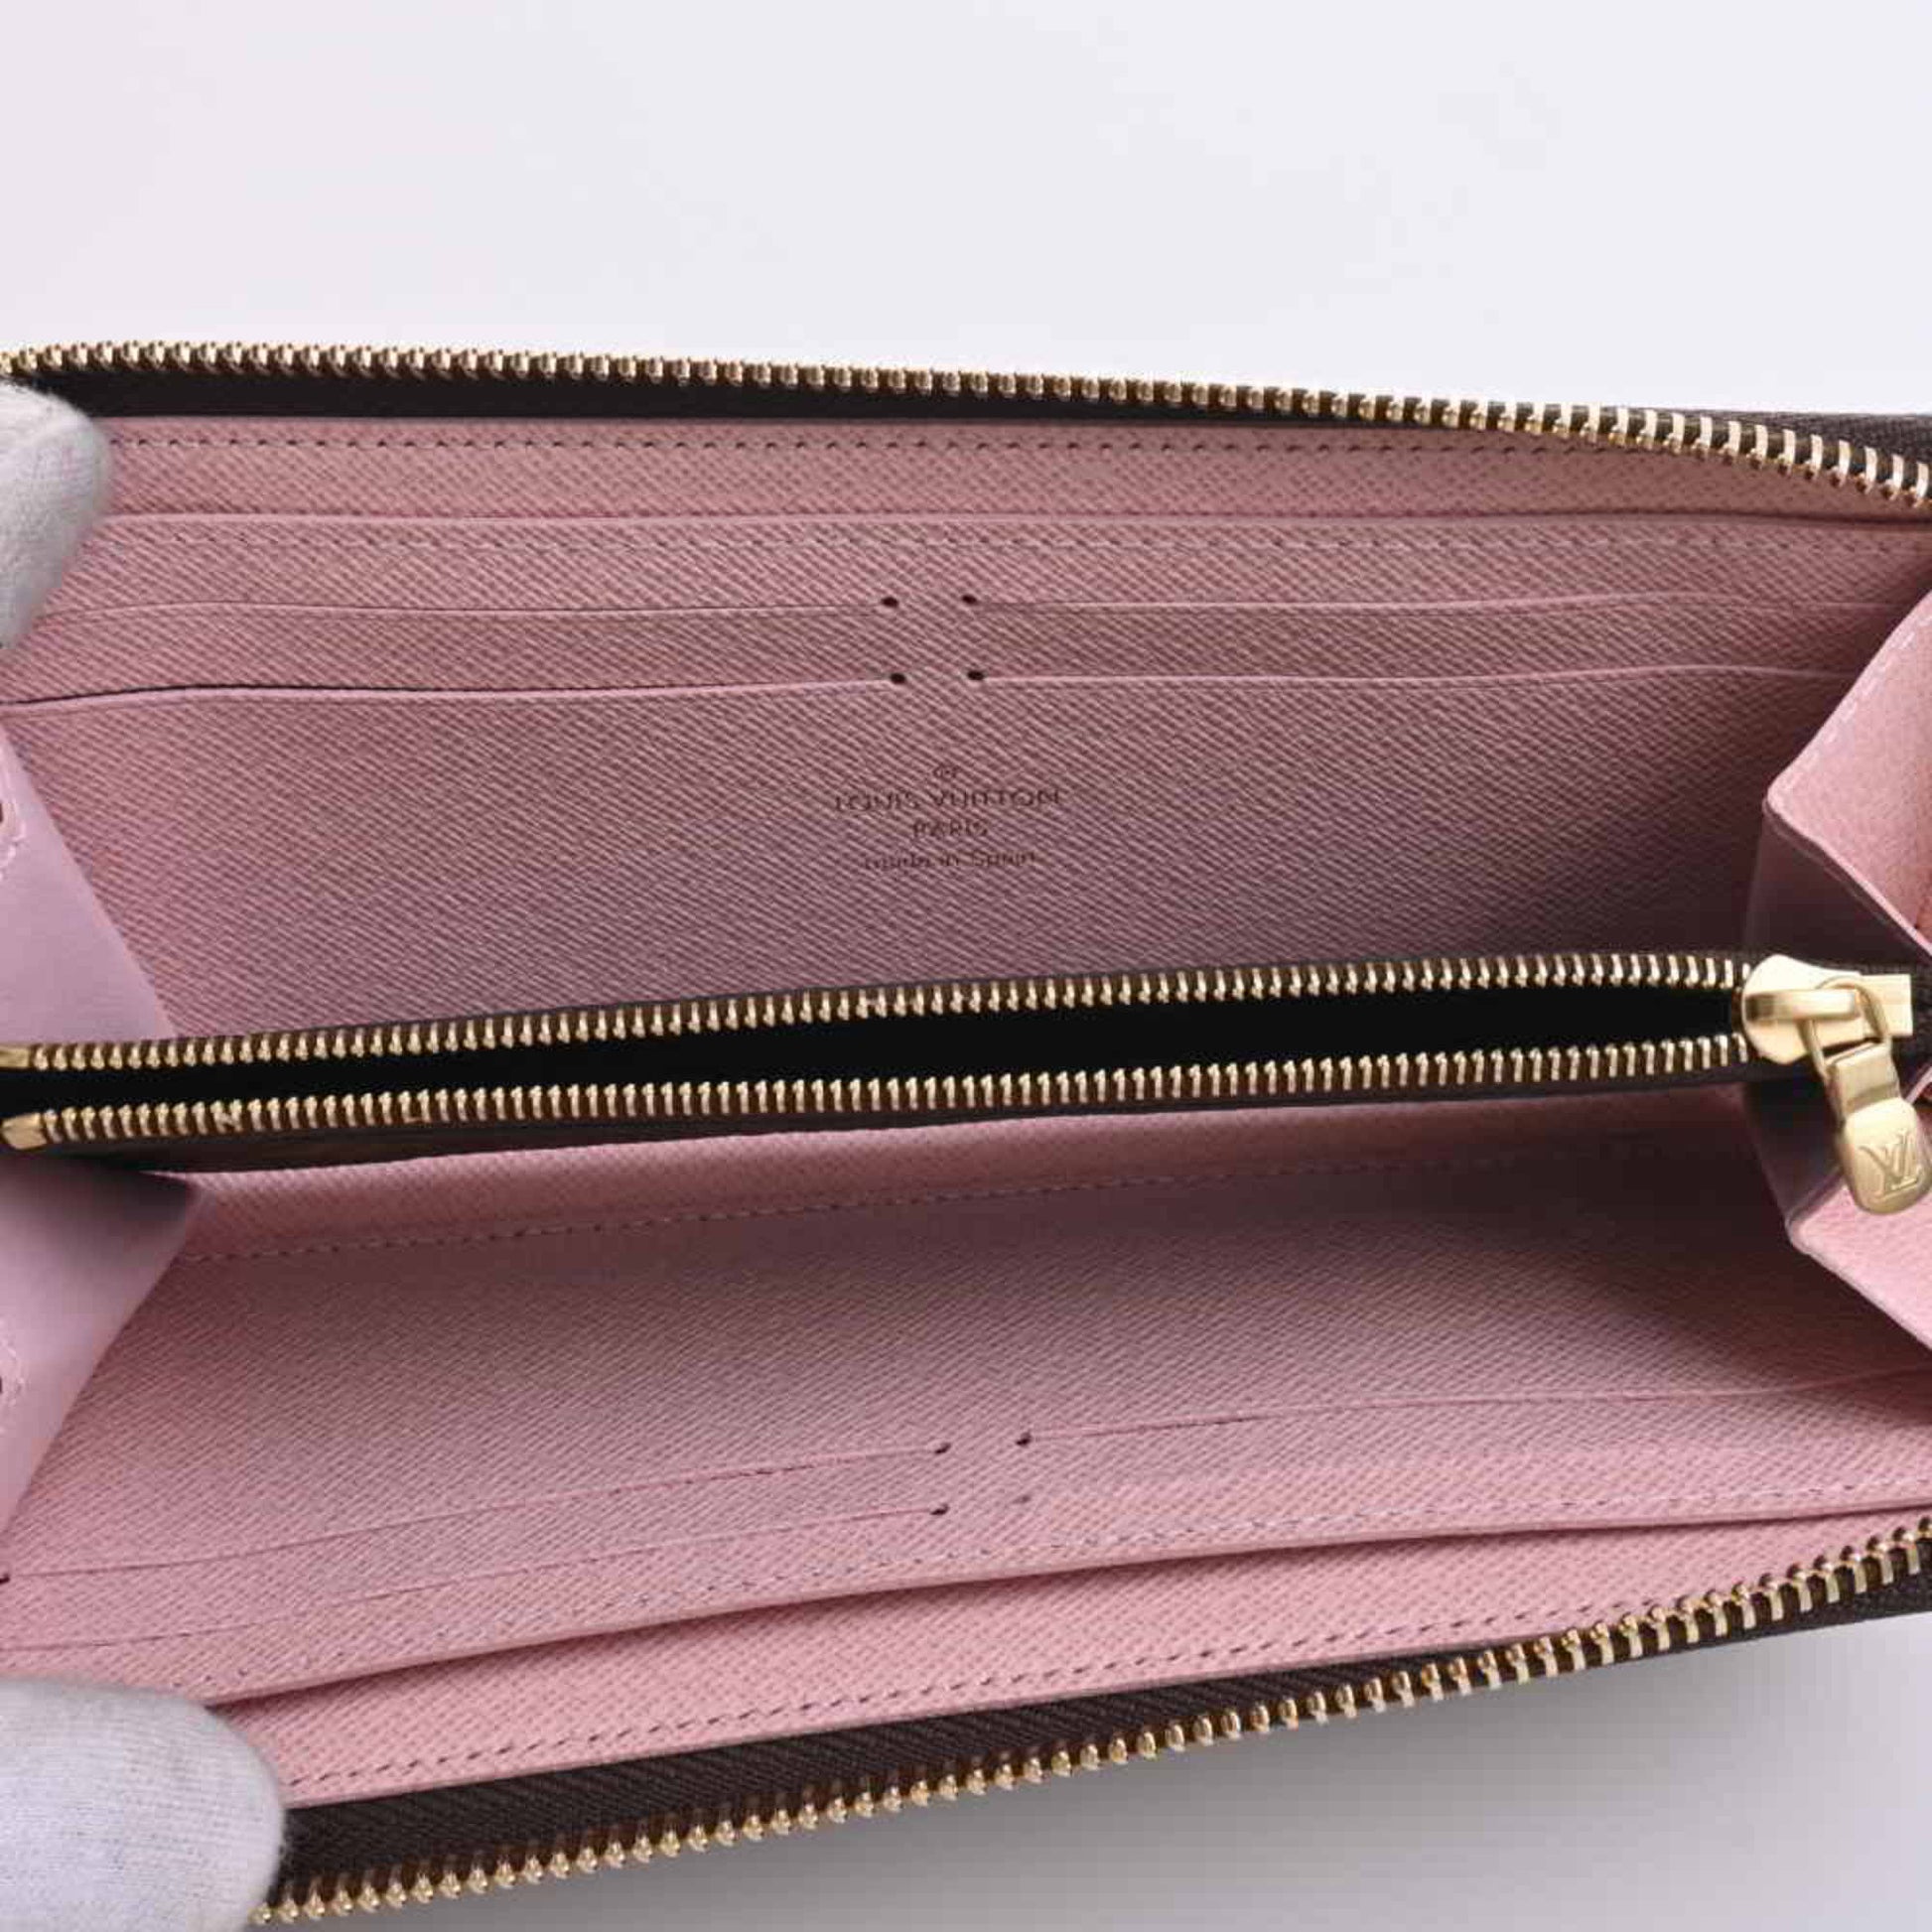 Authenticated Used Wallet Portefeuille Victorine Brown Pink Rose